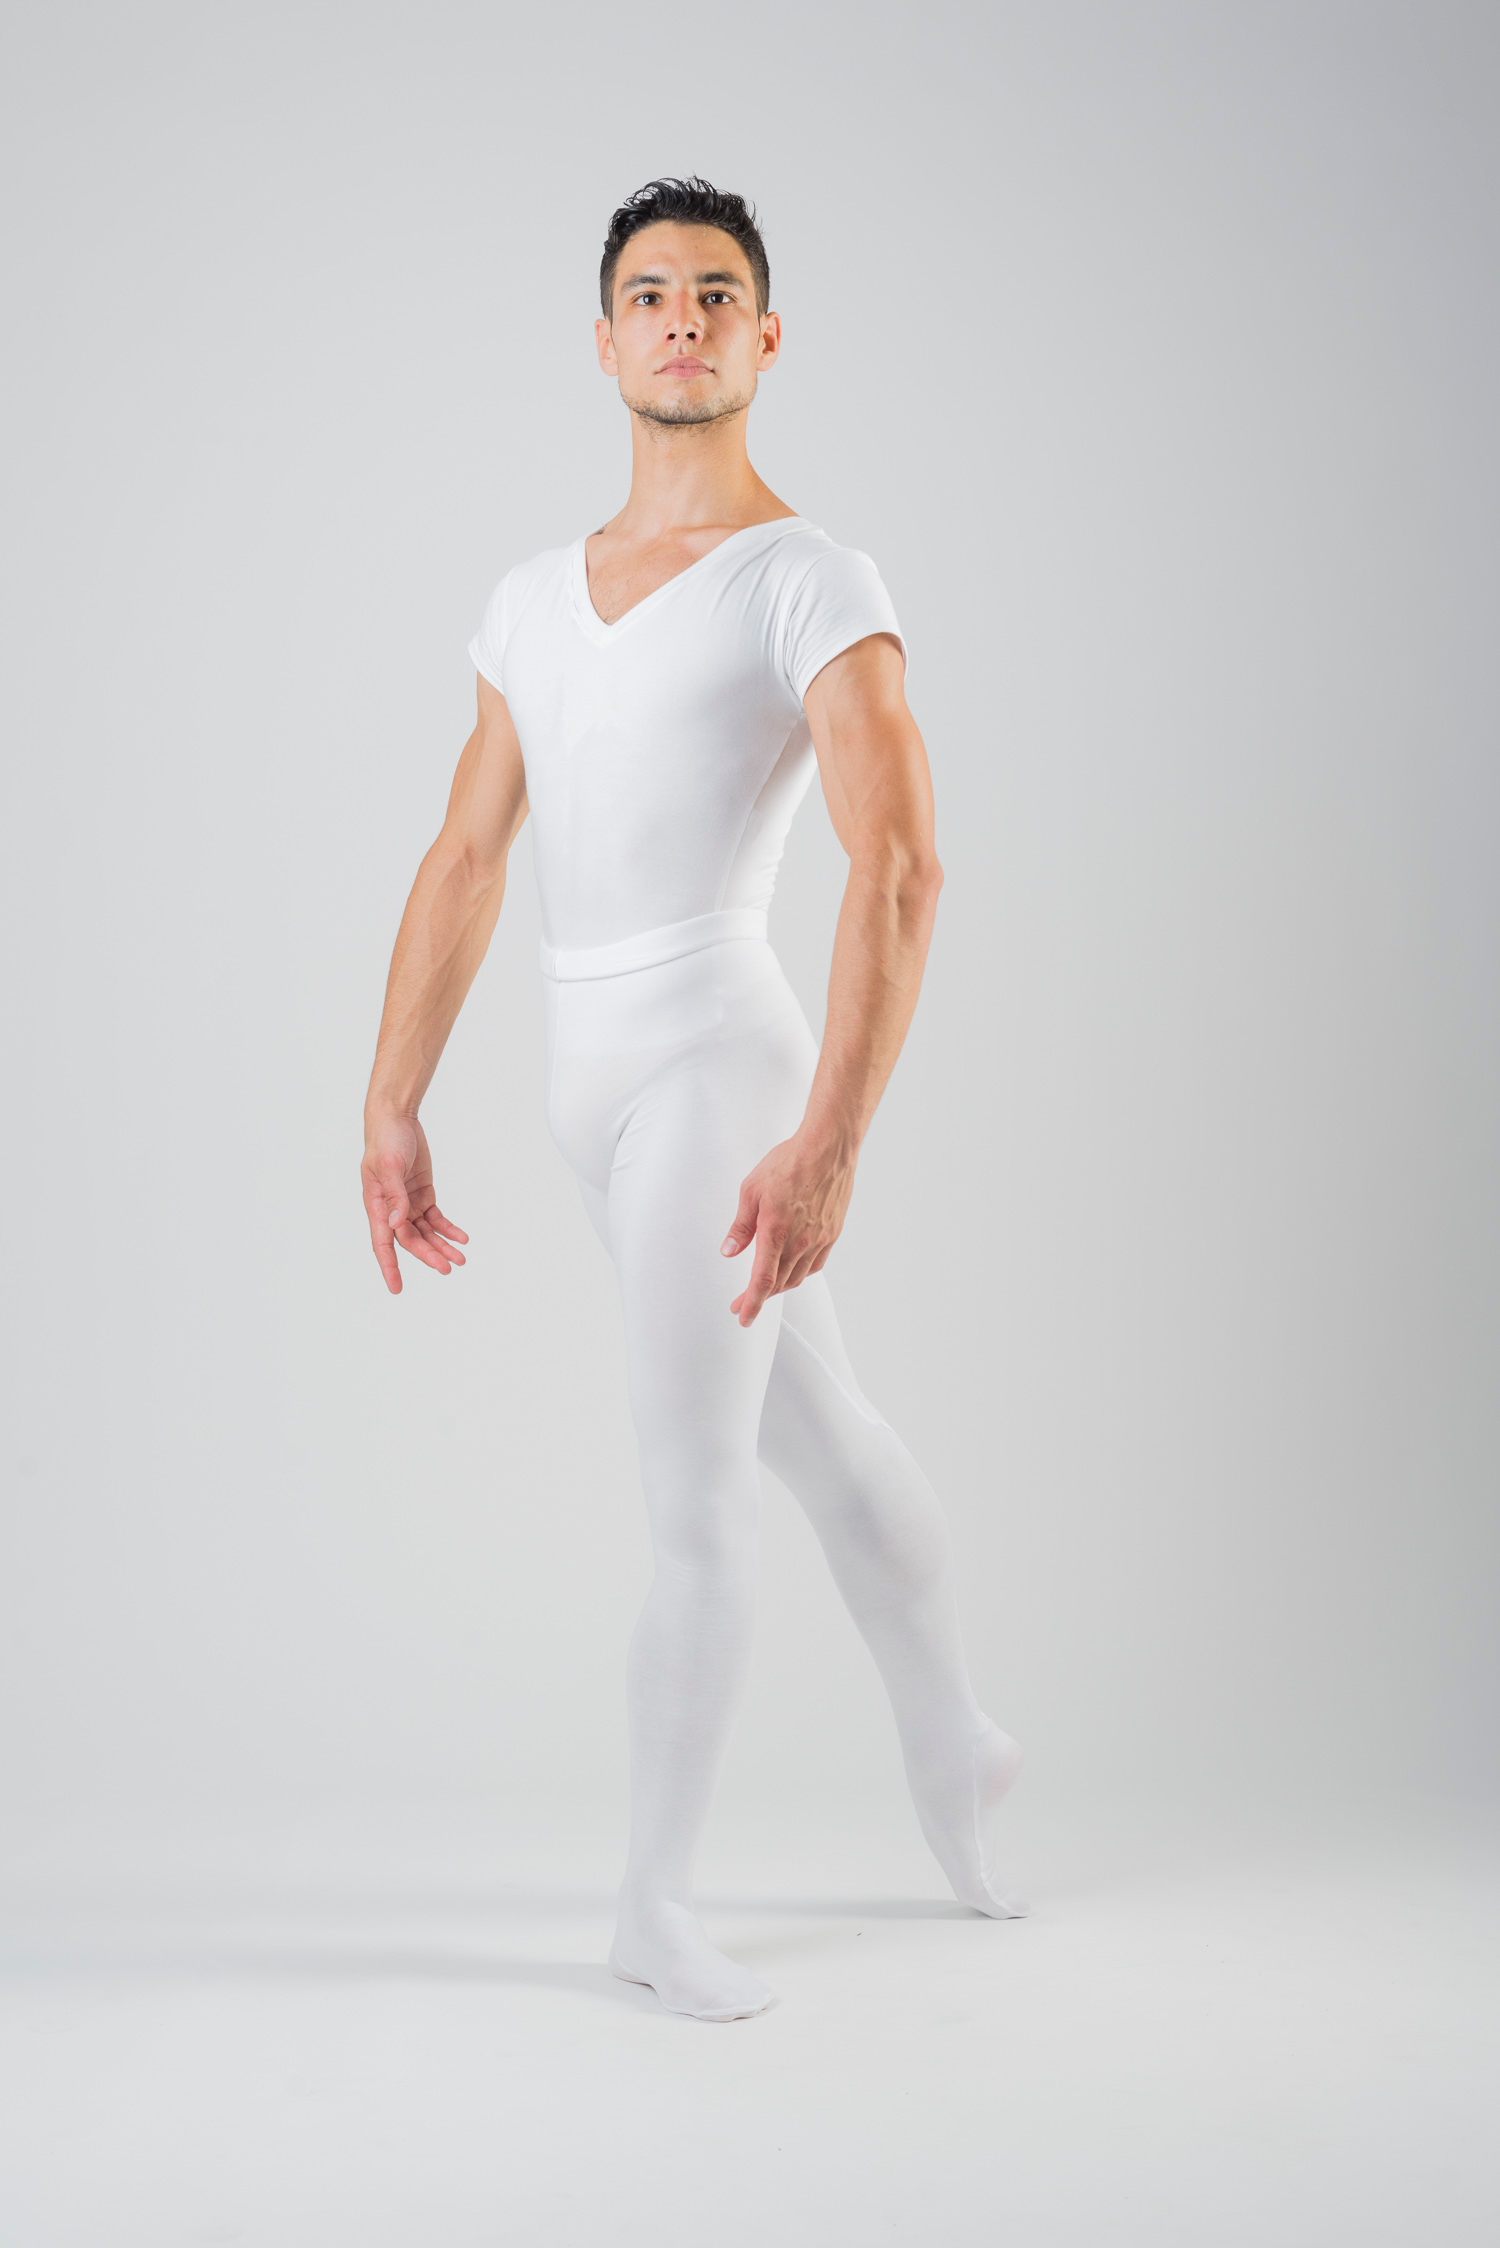 ⇒ Grey ballet dance Tights for Boy and Man